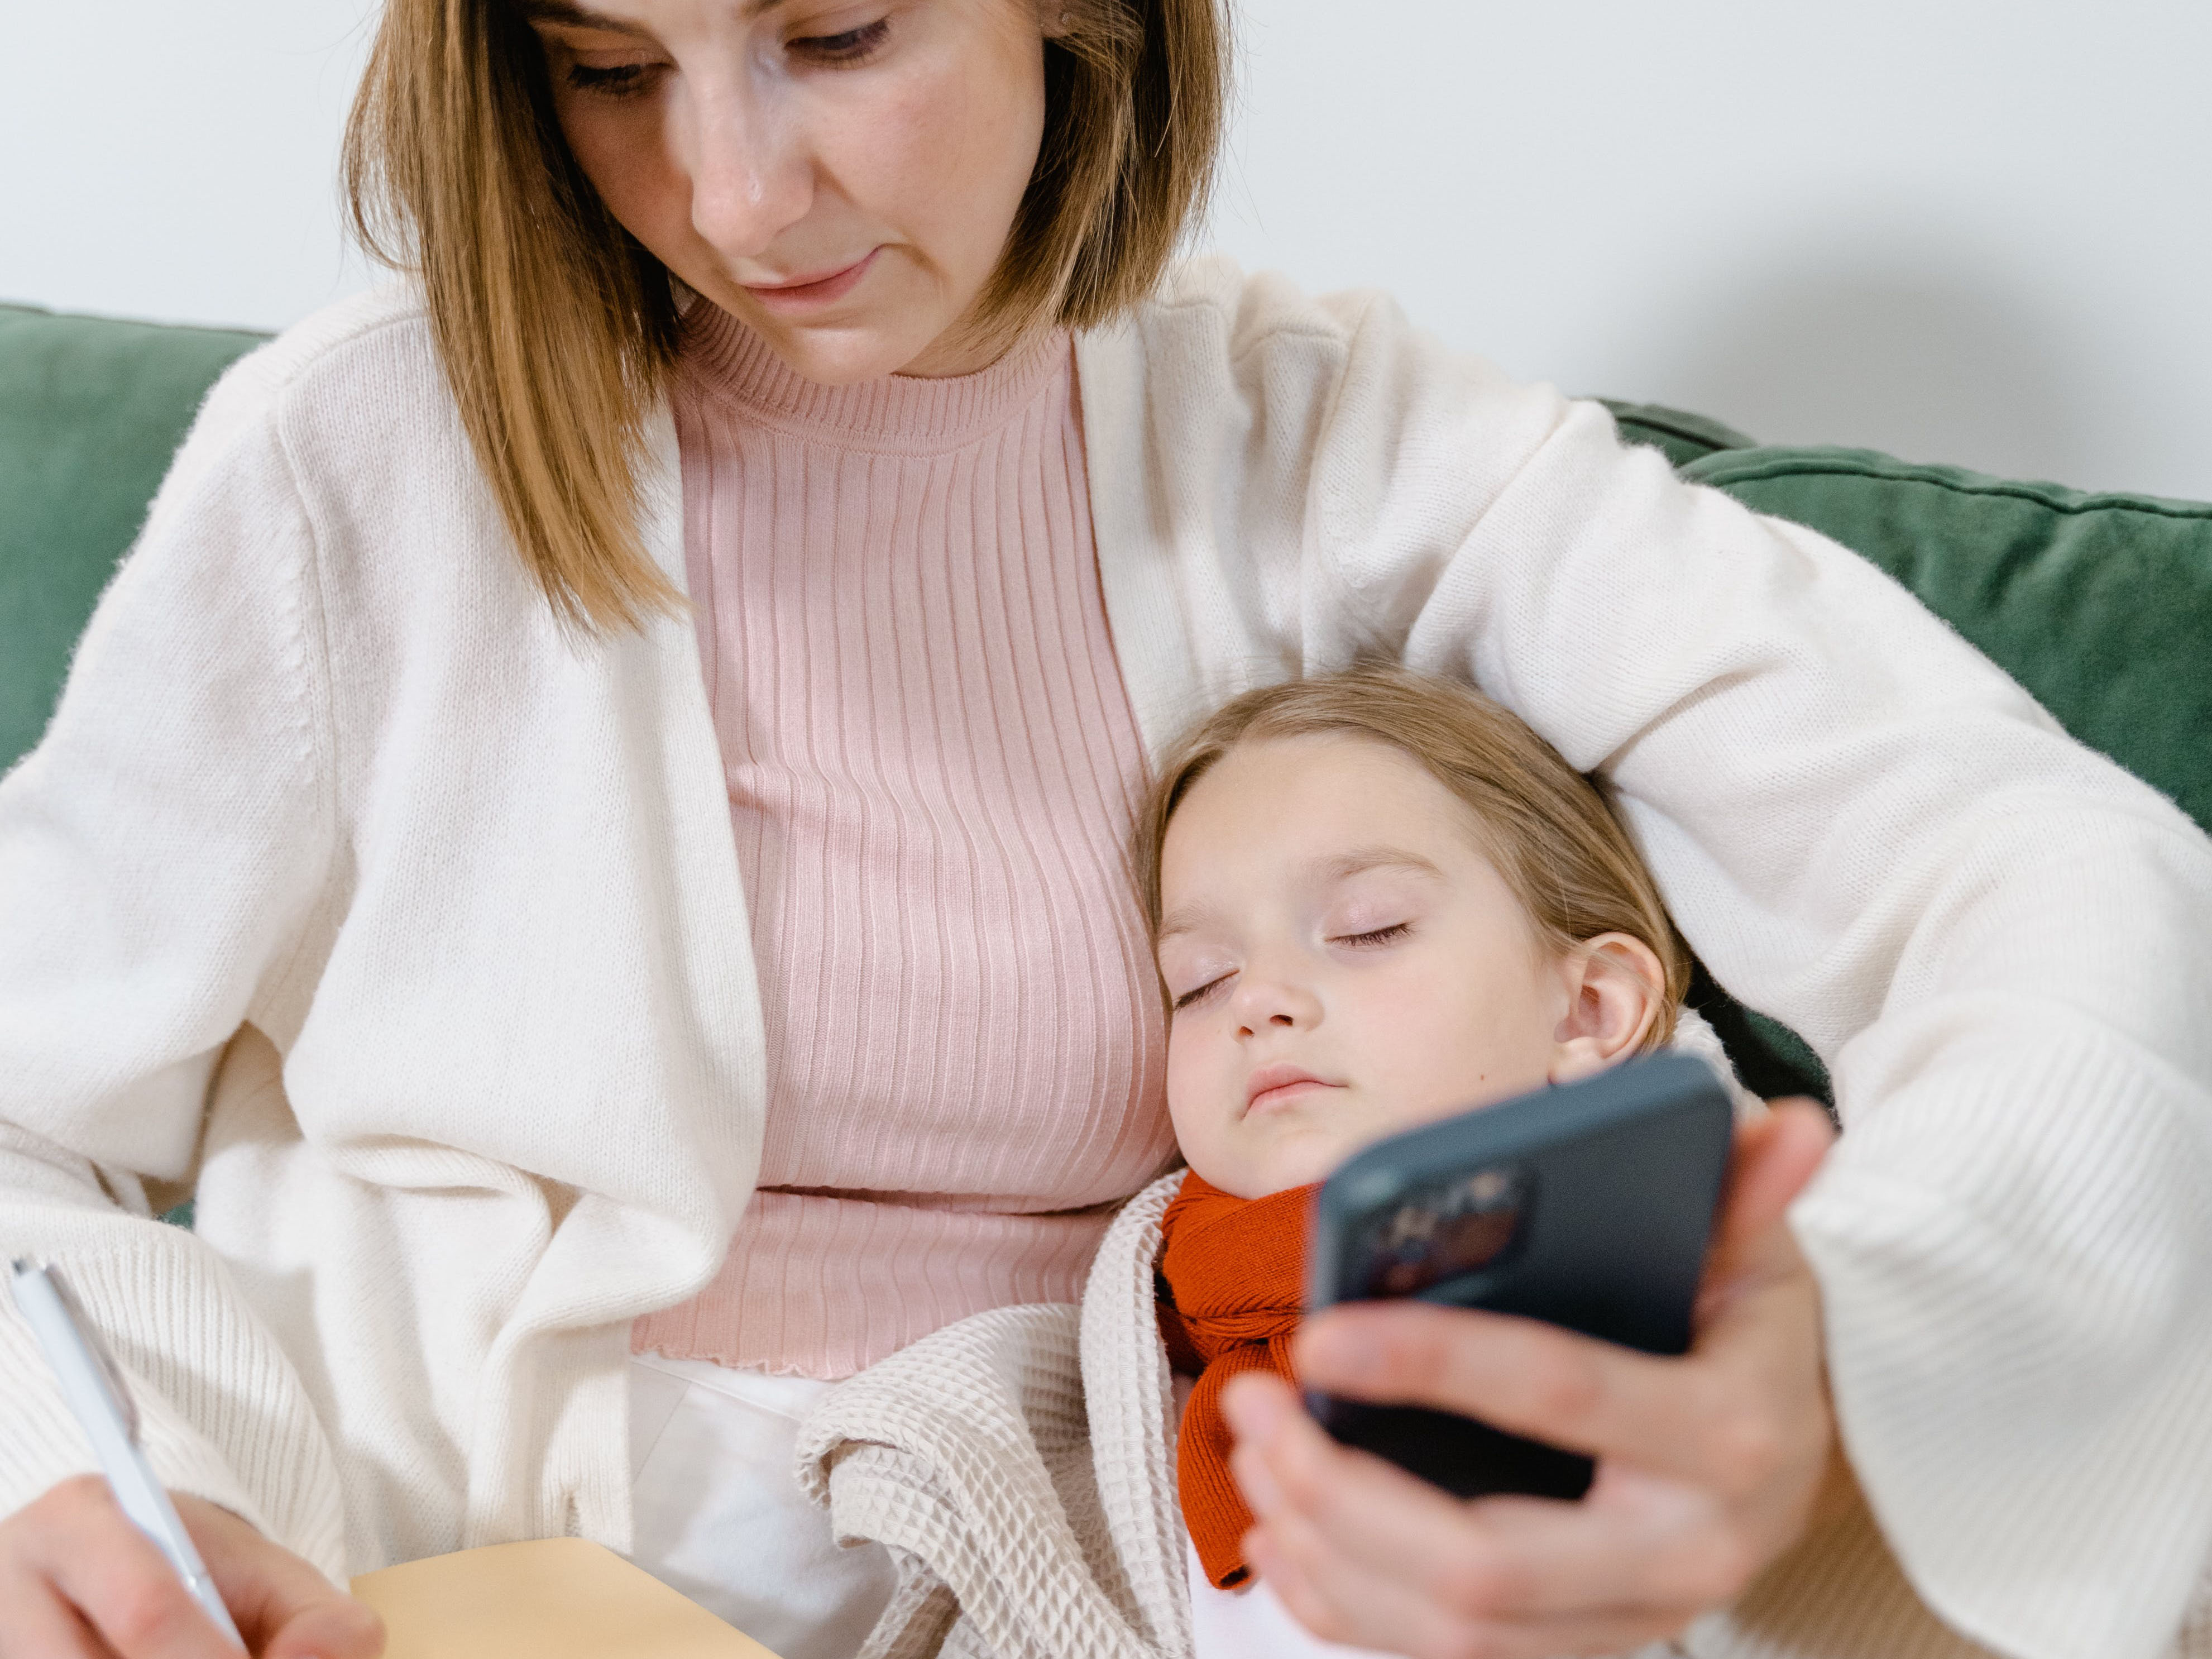 Mother with sick child using Telehealth to contact her doctor